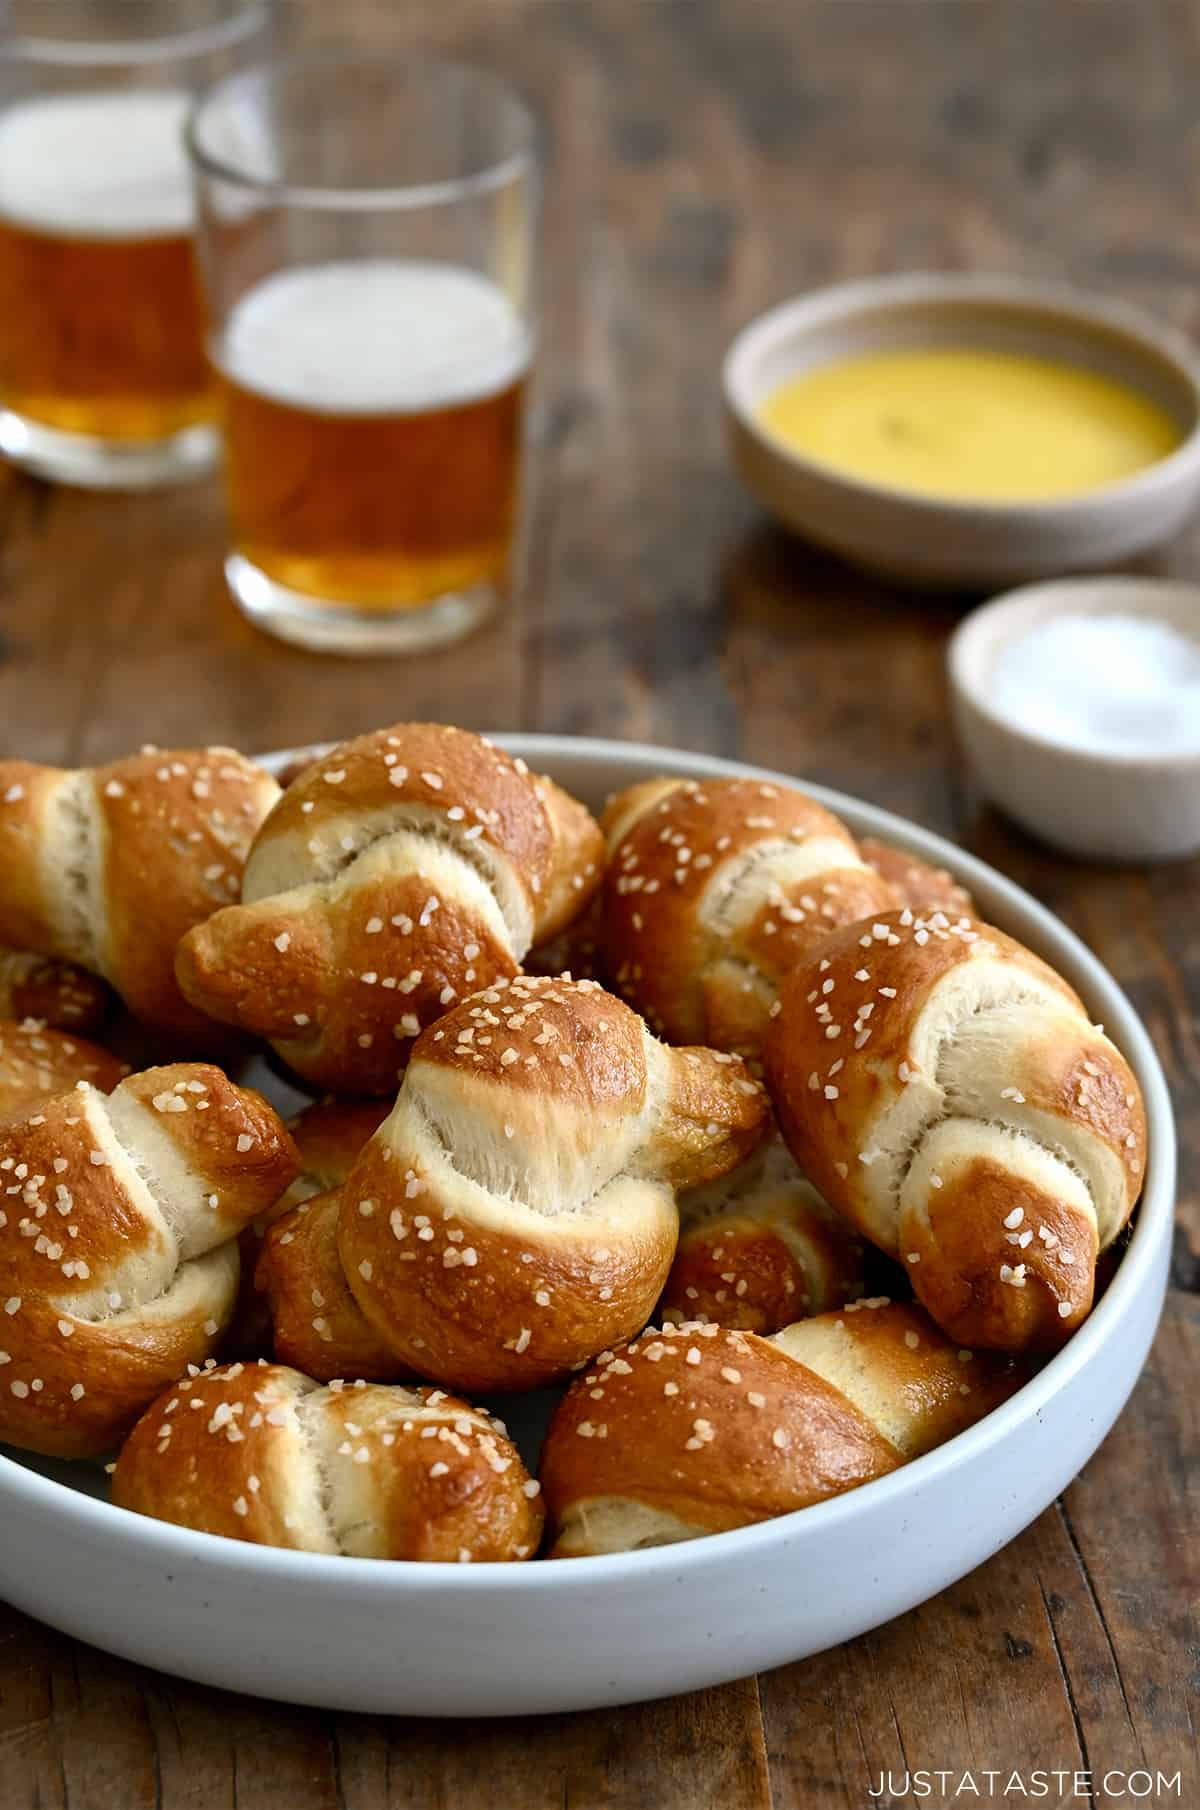 Pizza dough soft pretzel knots piled high in a white bowl with two glasses of beer nearby.